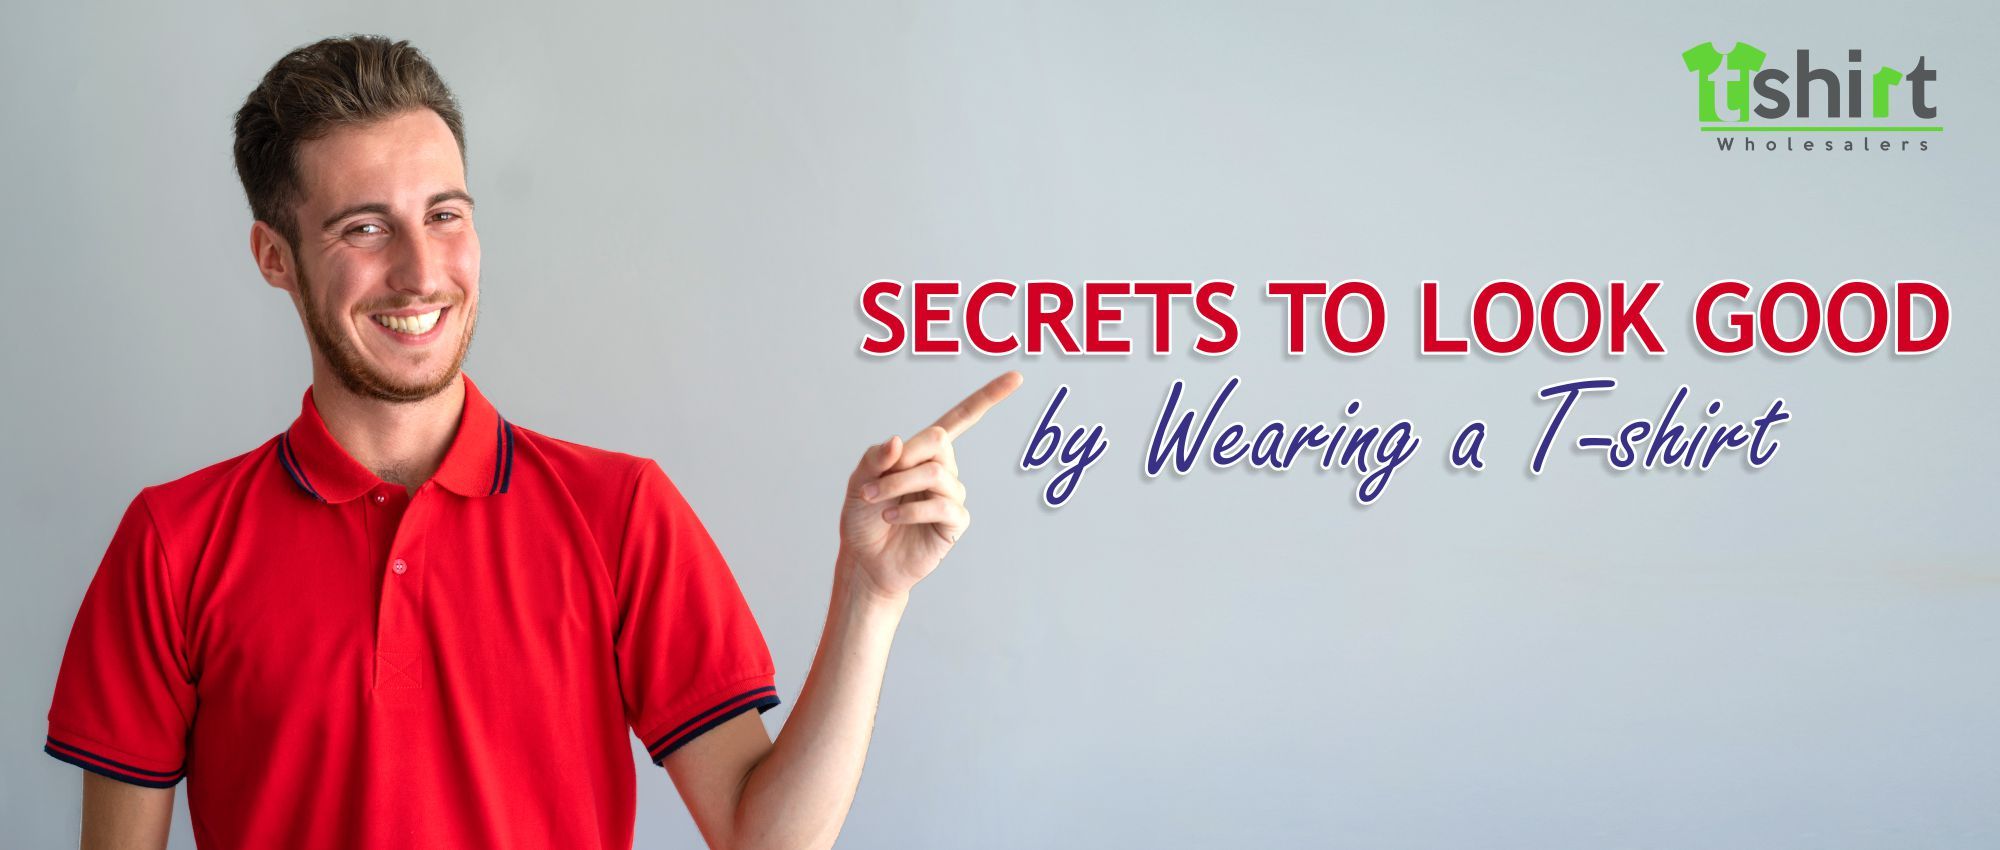 SECRETS TO LOOK GOOD BY WEARING A T-SHIRT